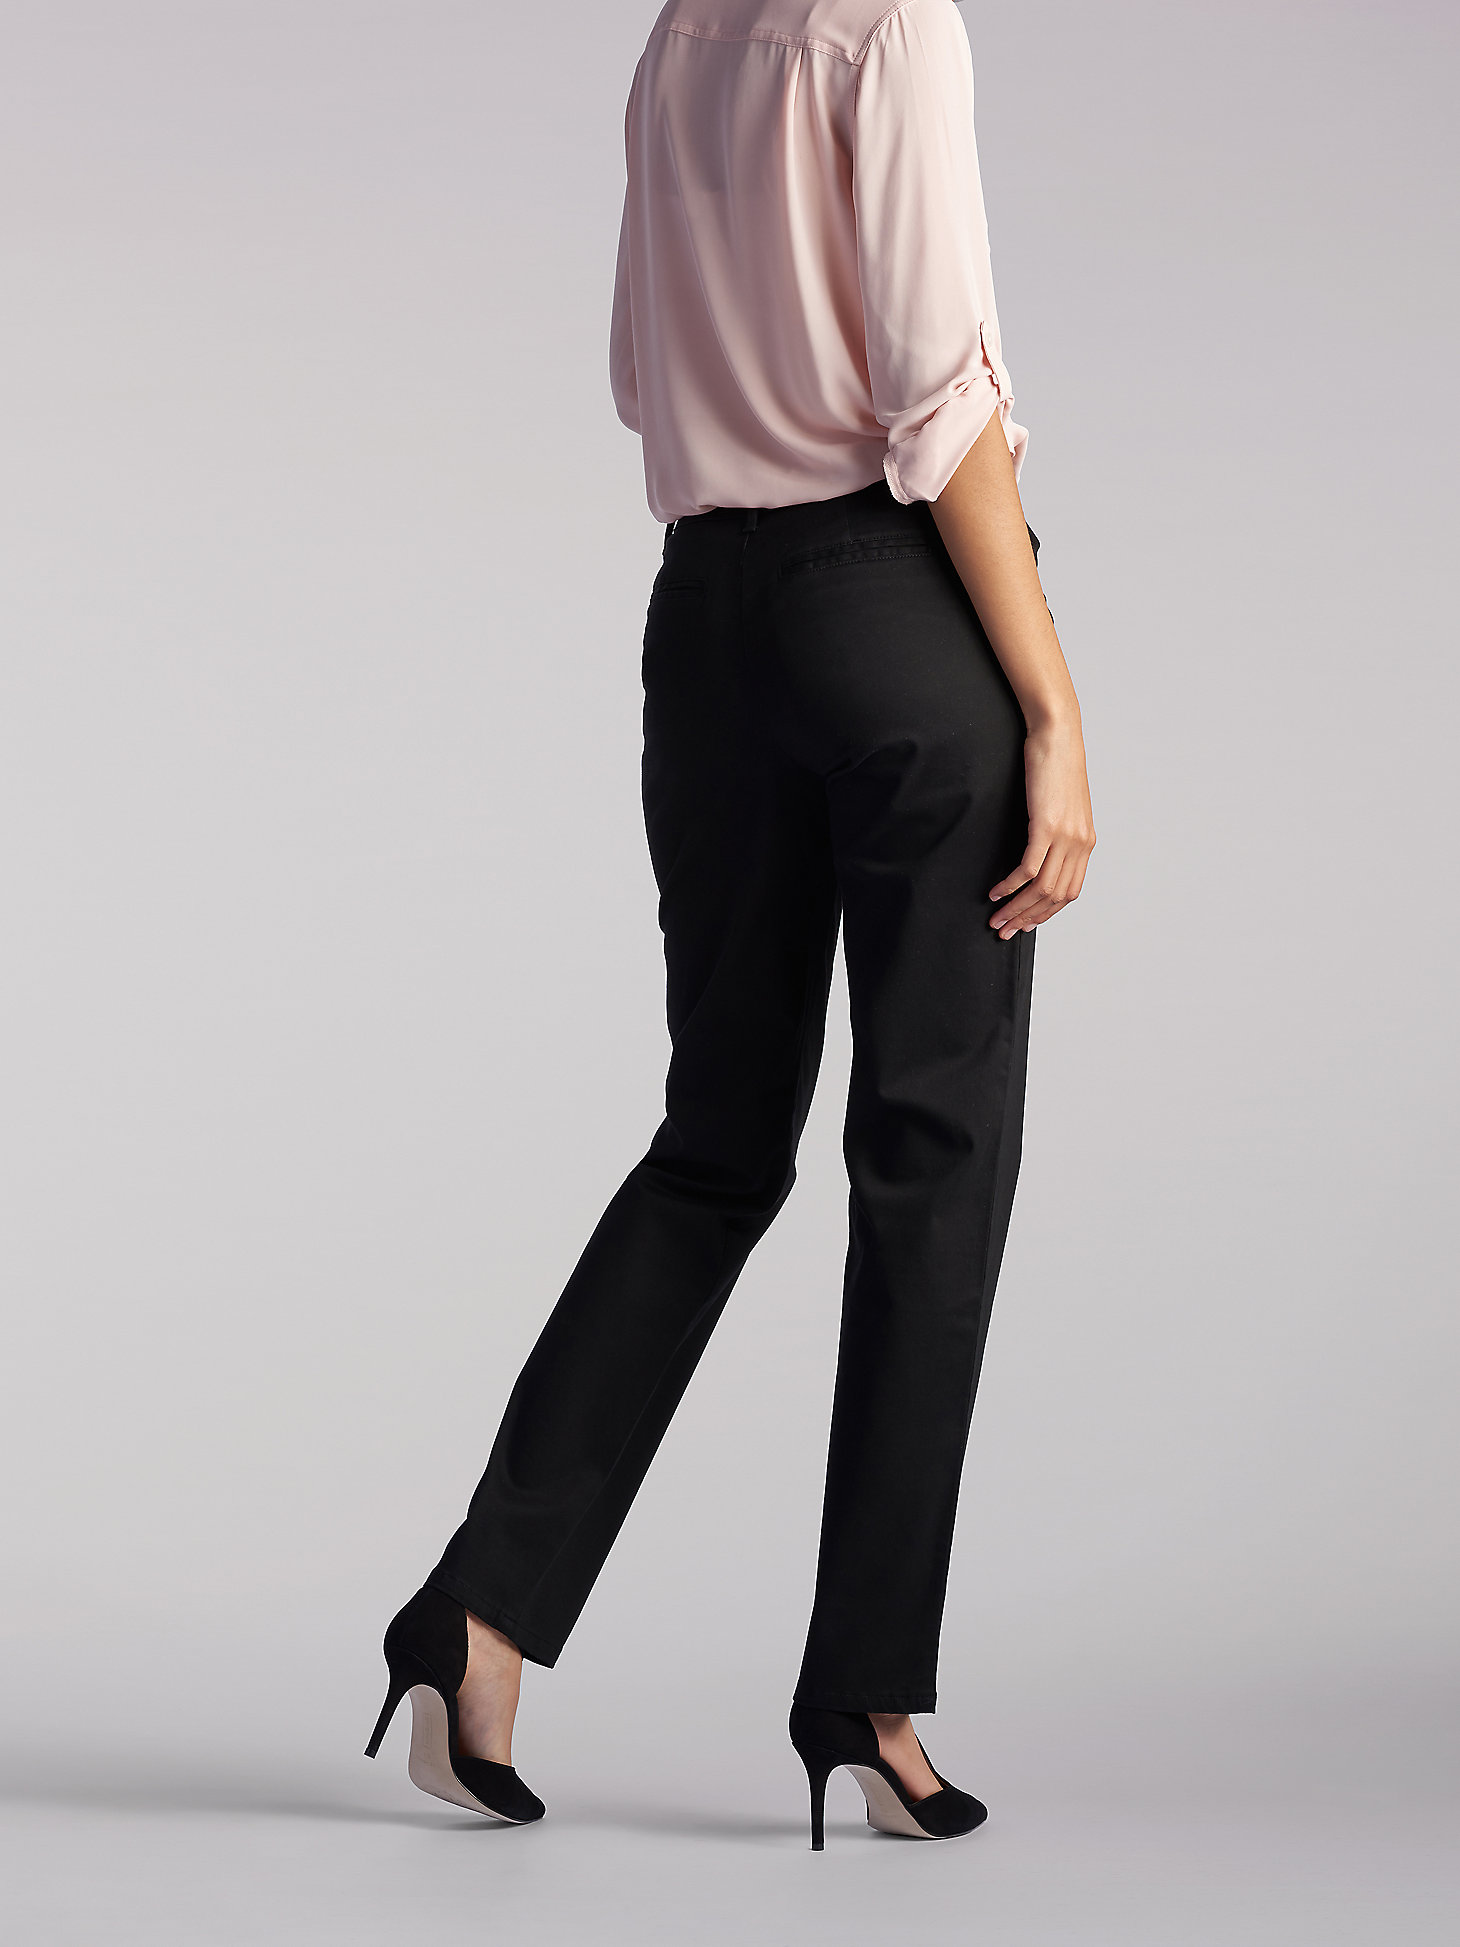 Women’s Relaxed Fit Straight Leg Pant (All Day Pant) (Petite) in Black alternative view 2